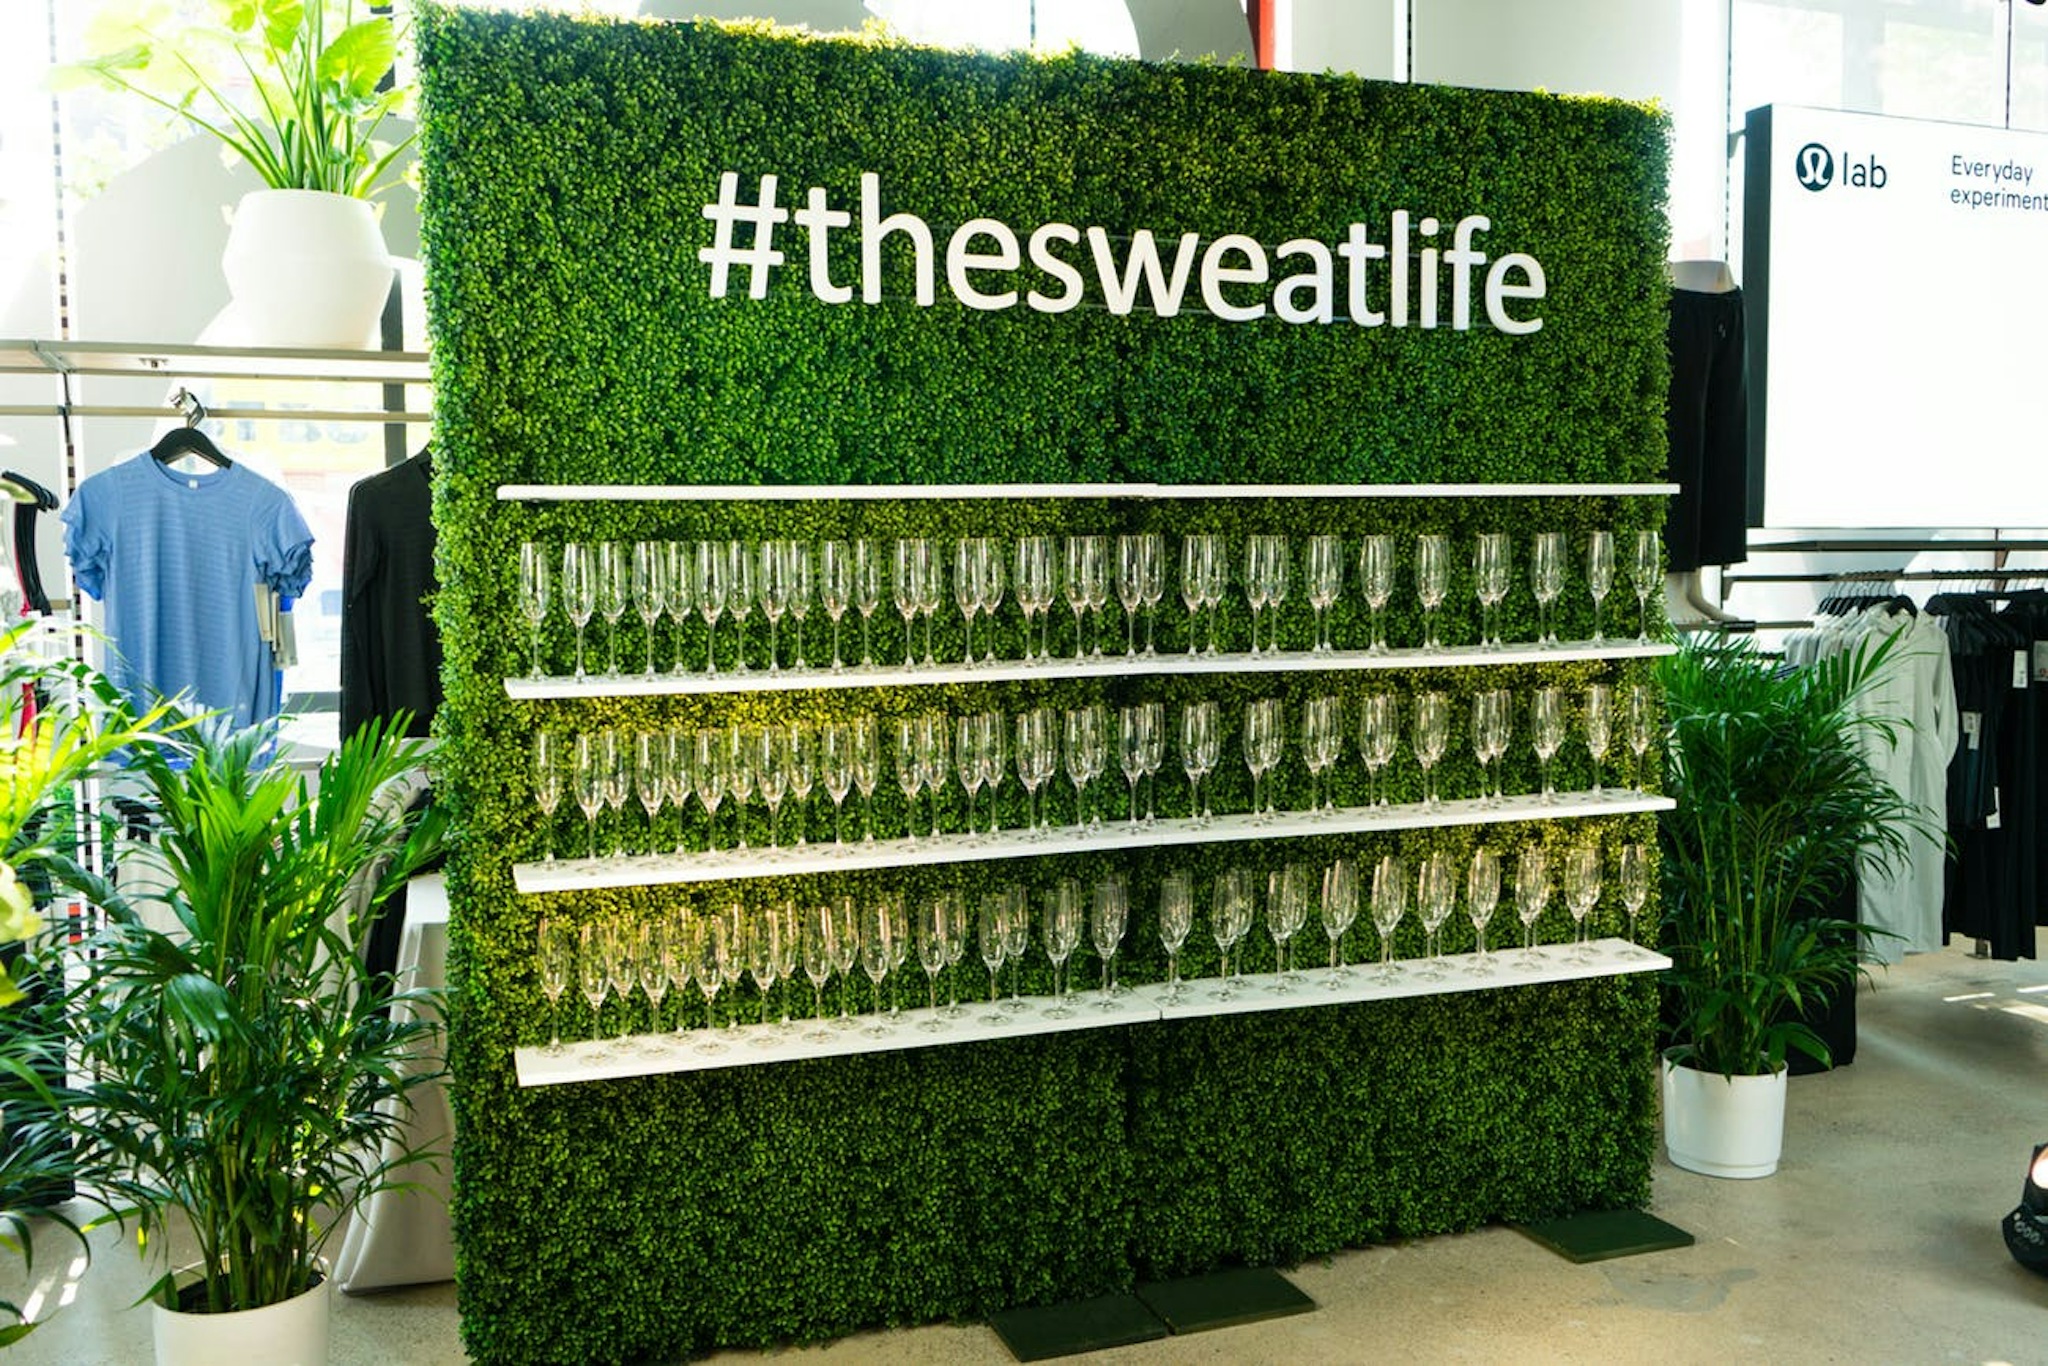 largest lululemon store opening in Chicago with a greenery wall of champagne and a #thesweatlife sign